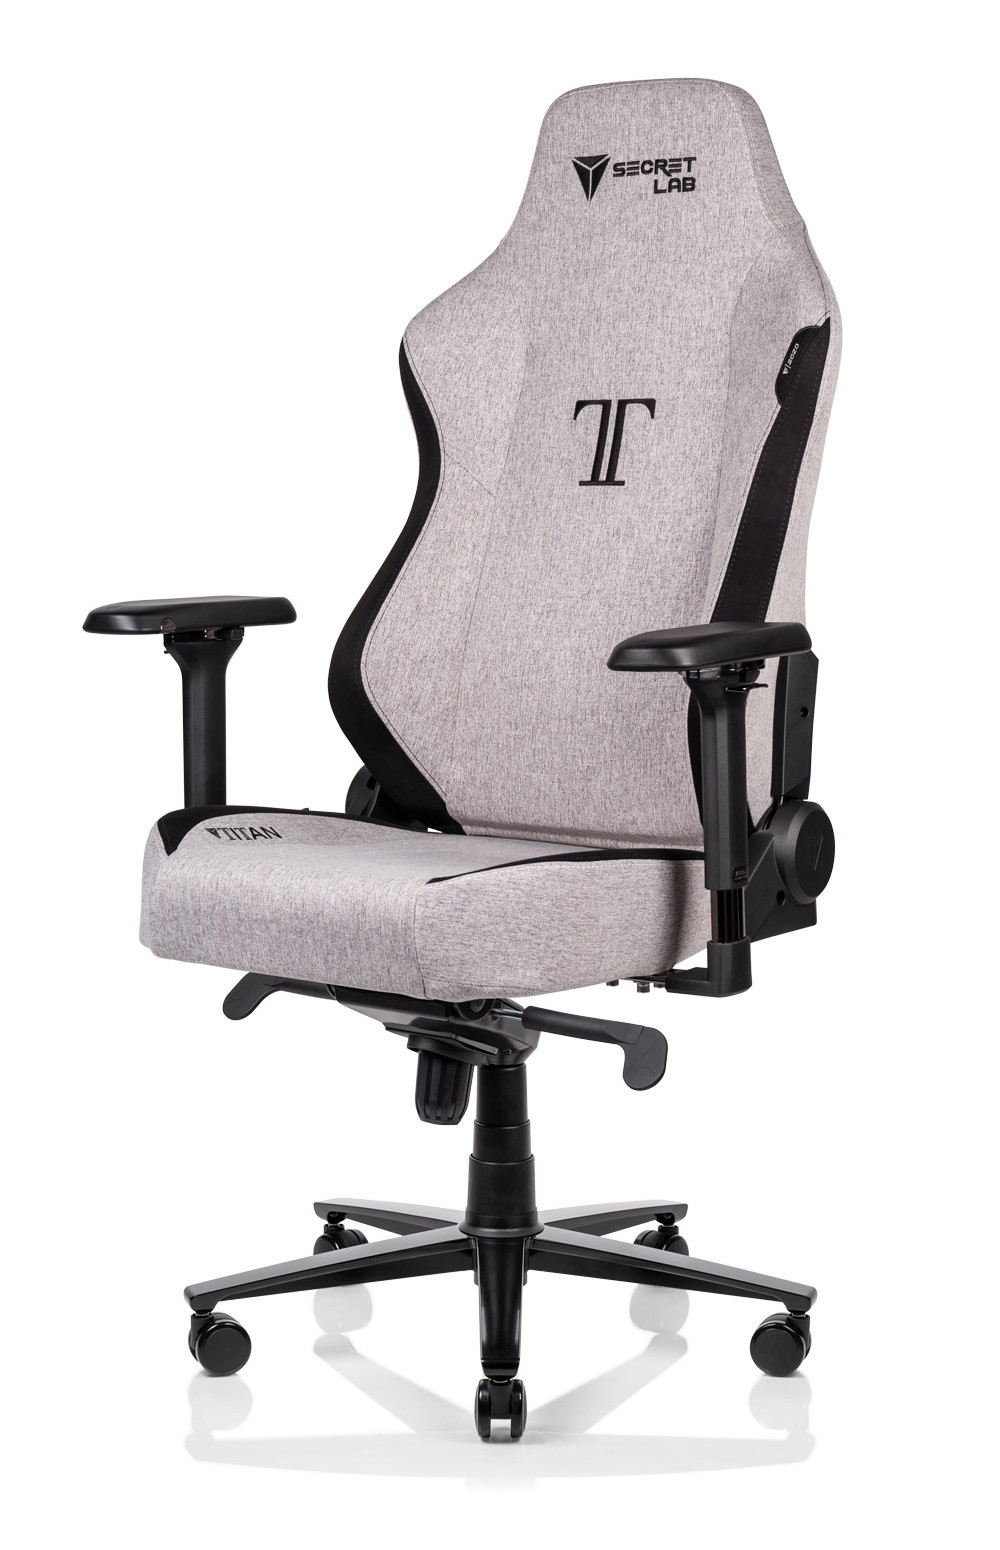 Secret Lab Gaming Chair White Off 66